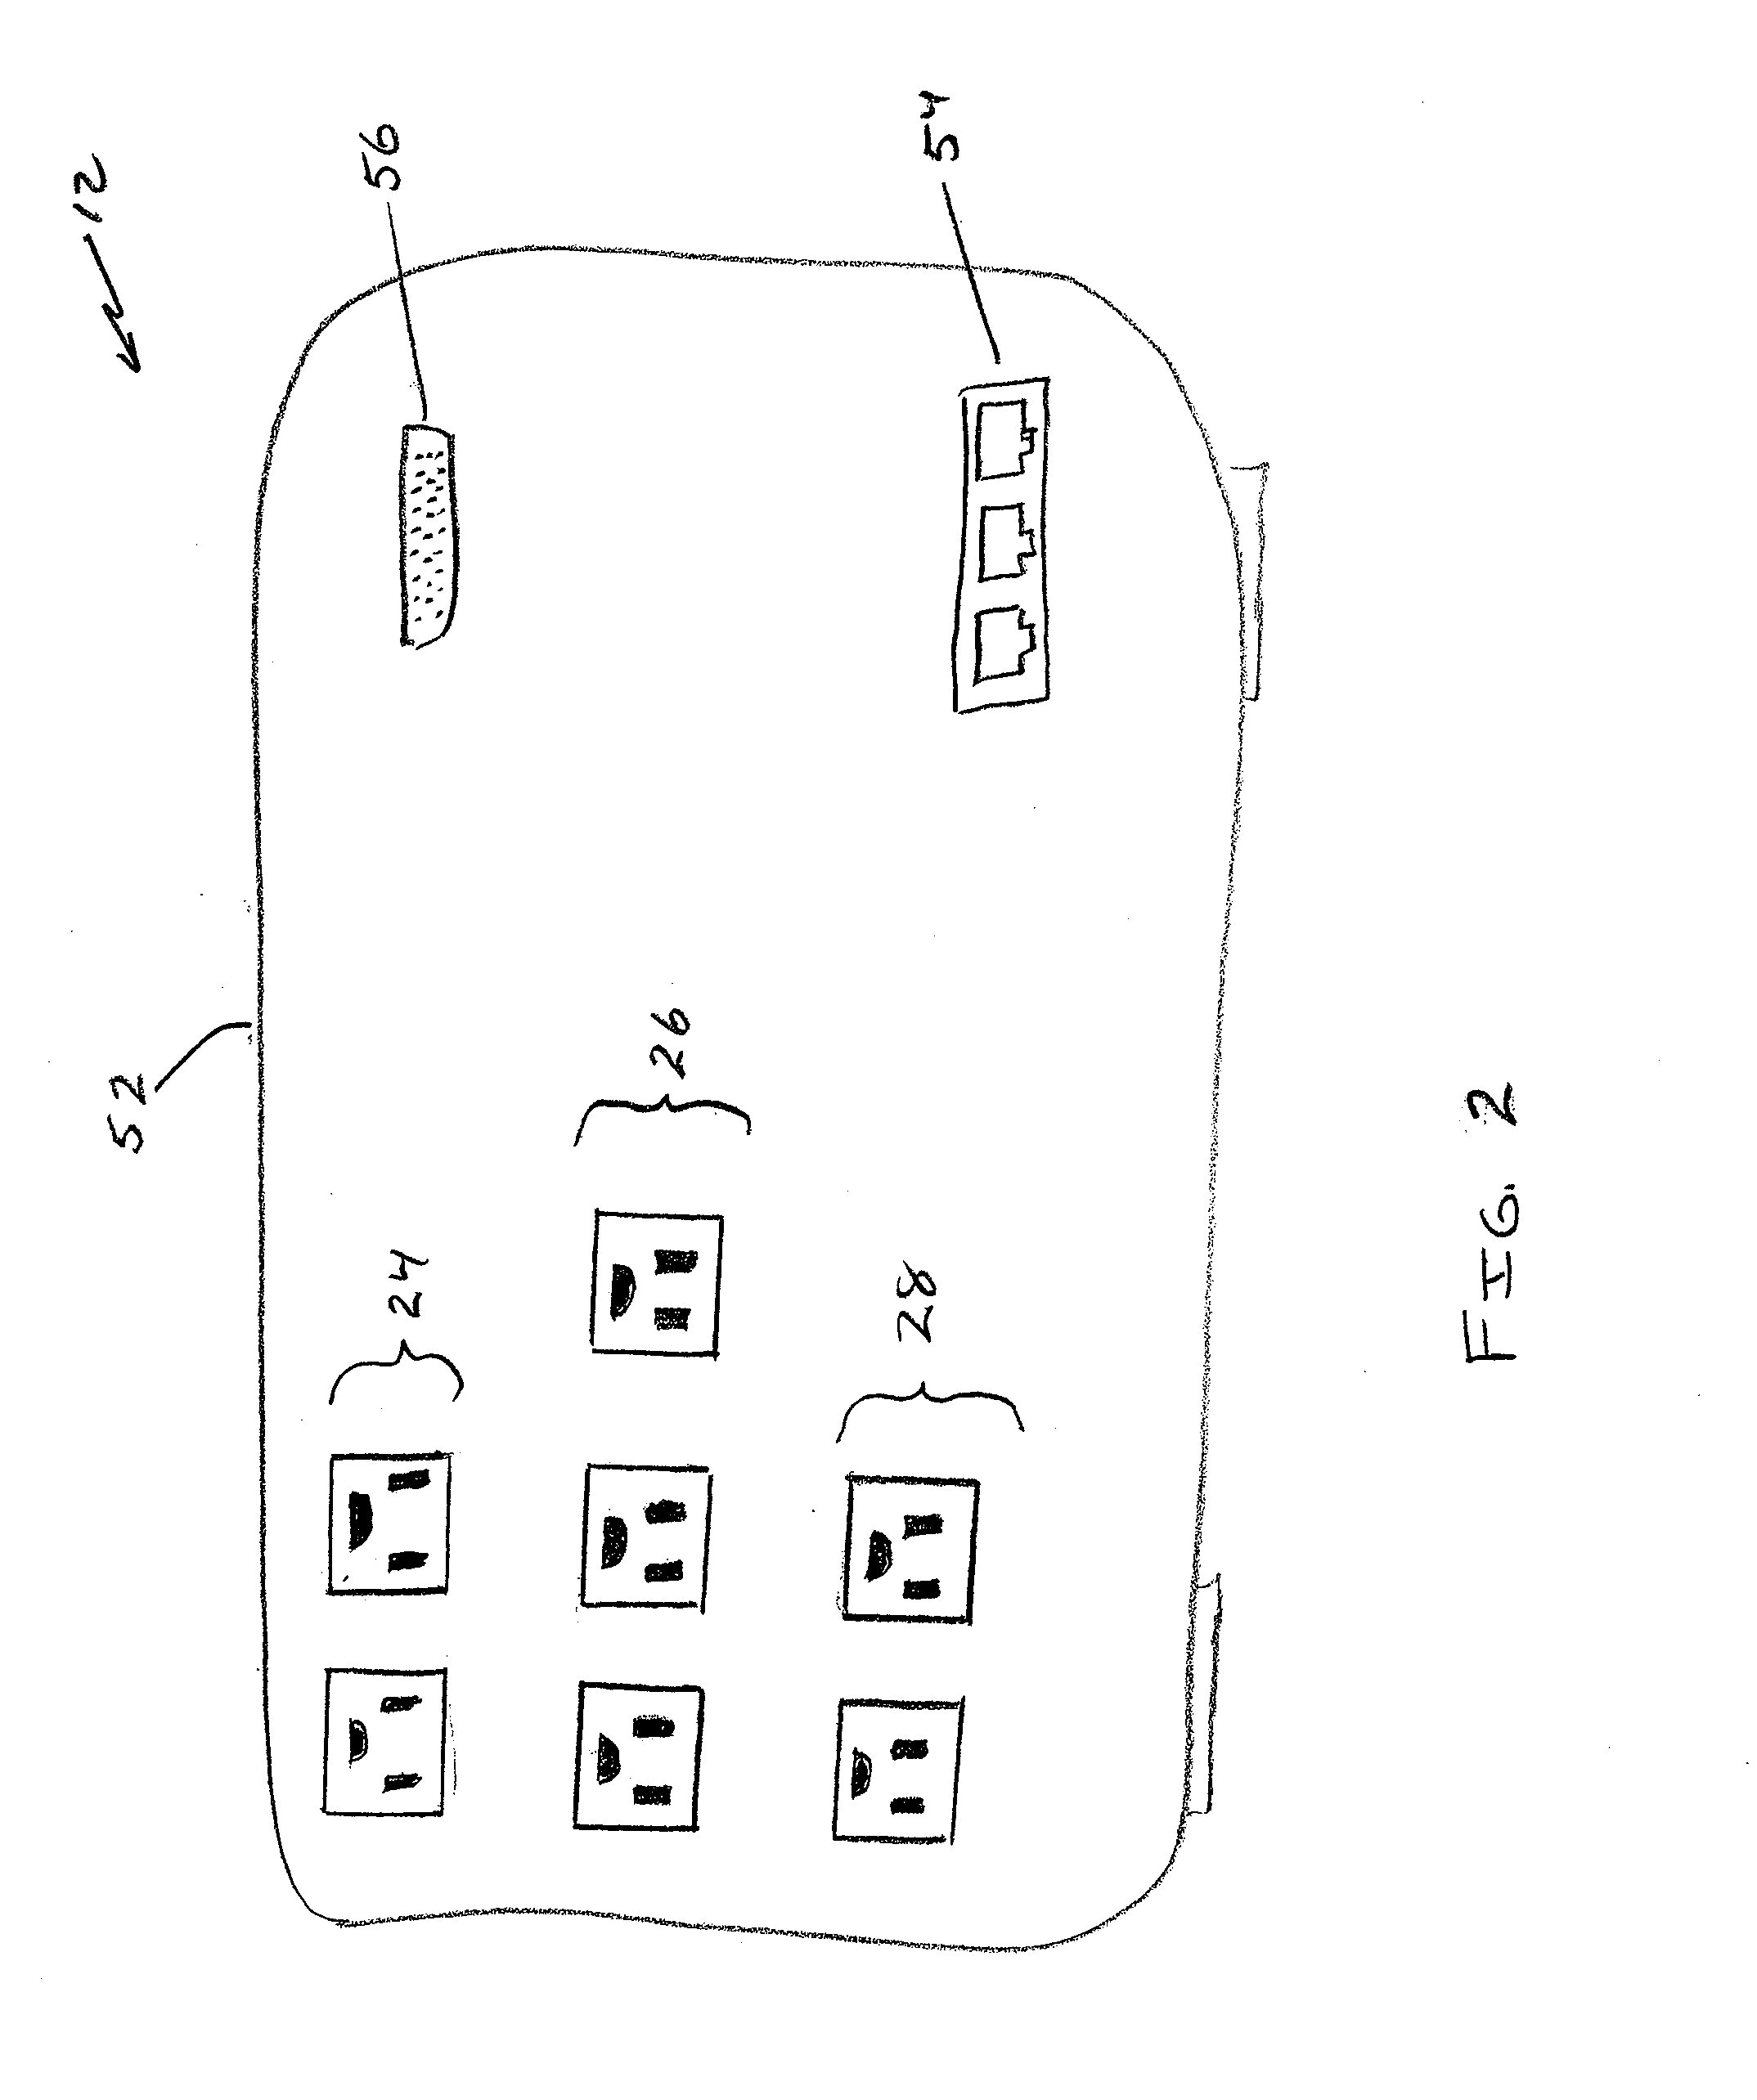 Apparatus, system and method for a ups